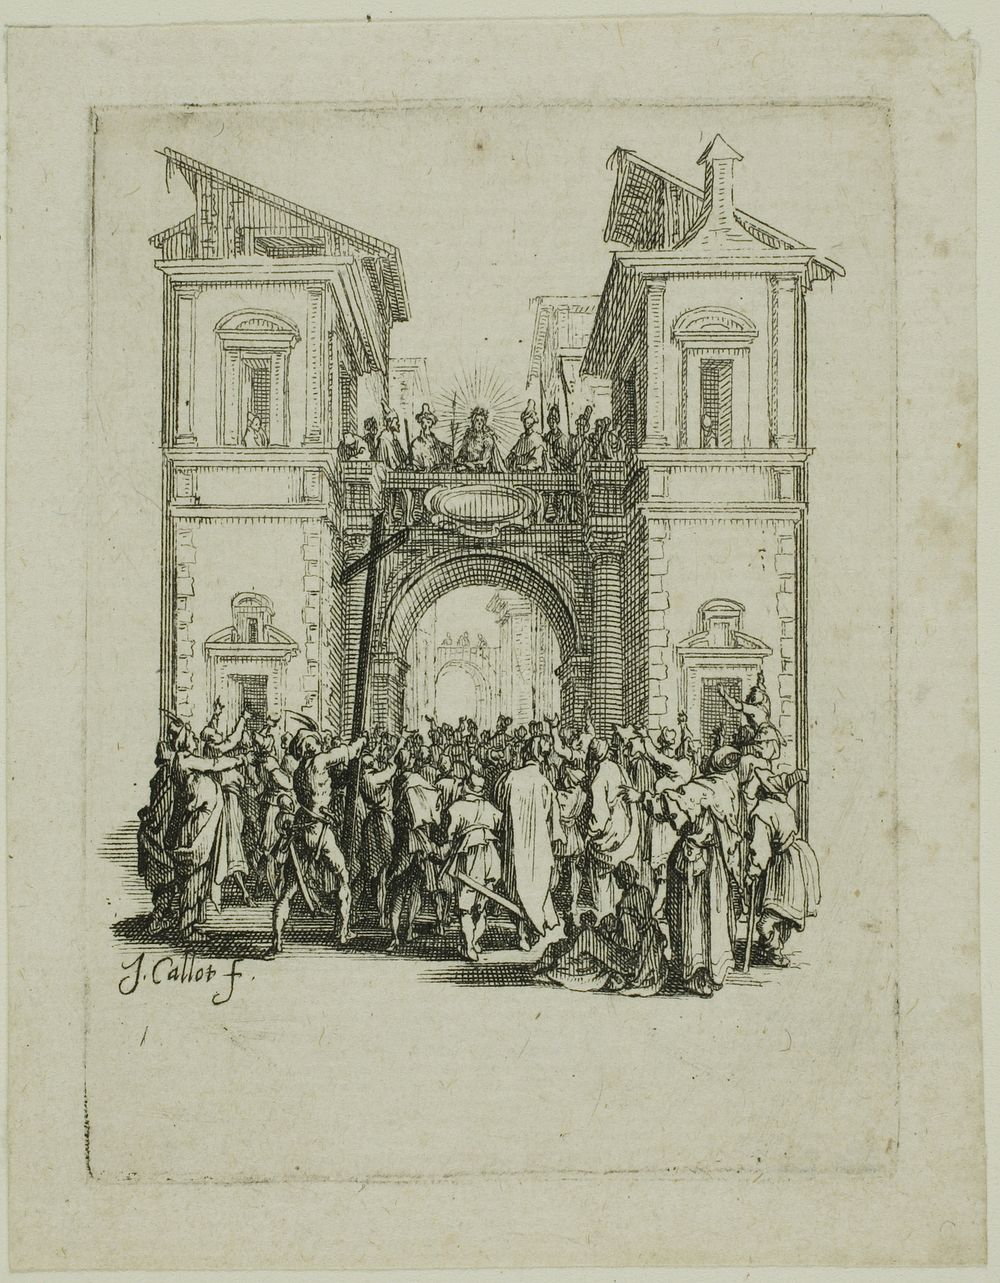 The Presentation to the People, from The Small Passion by Jacques Callot